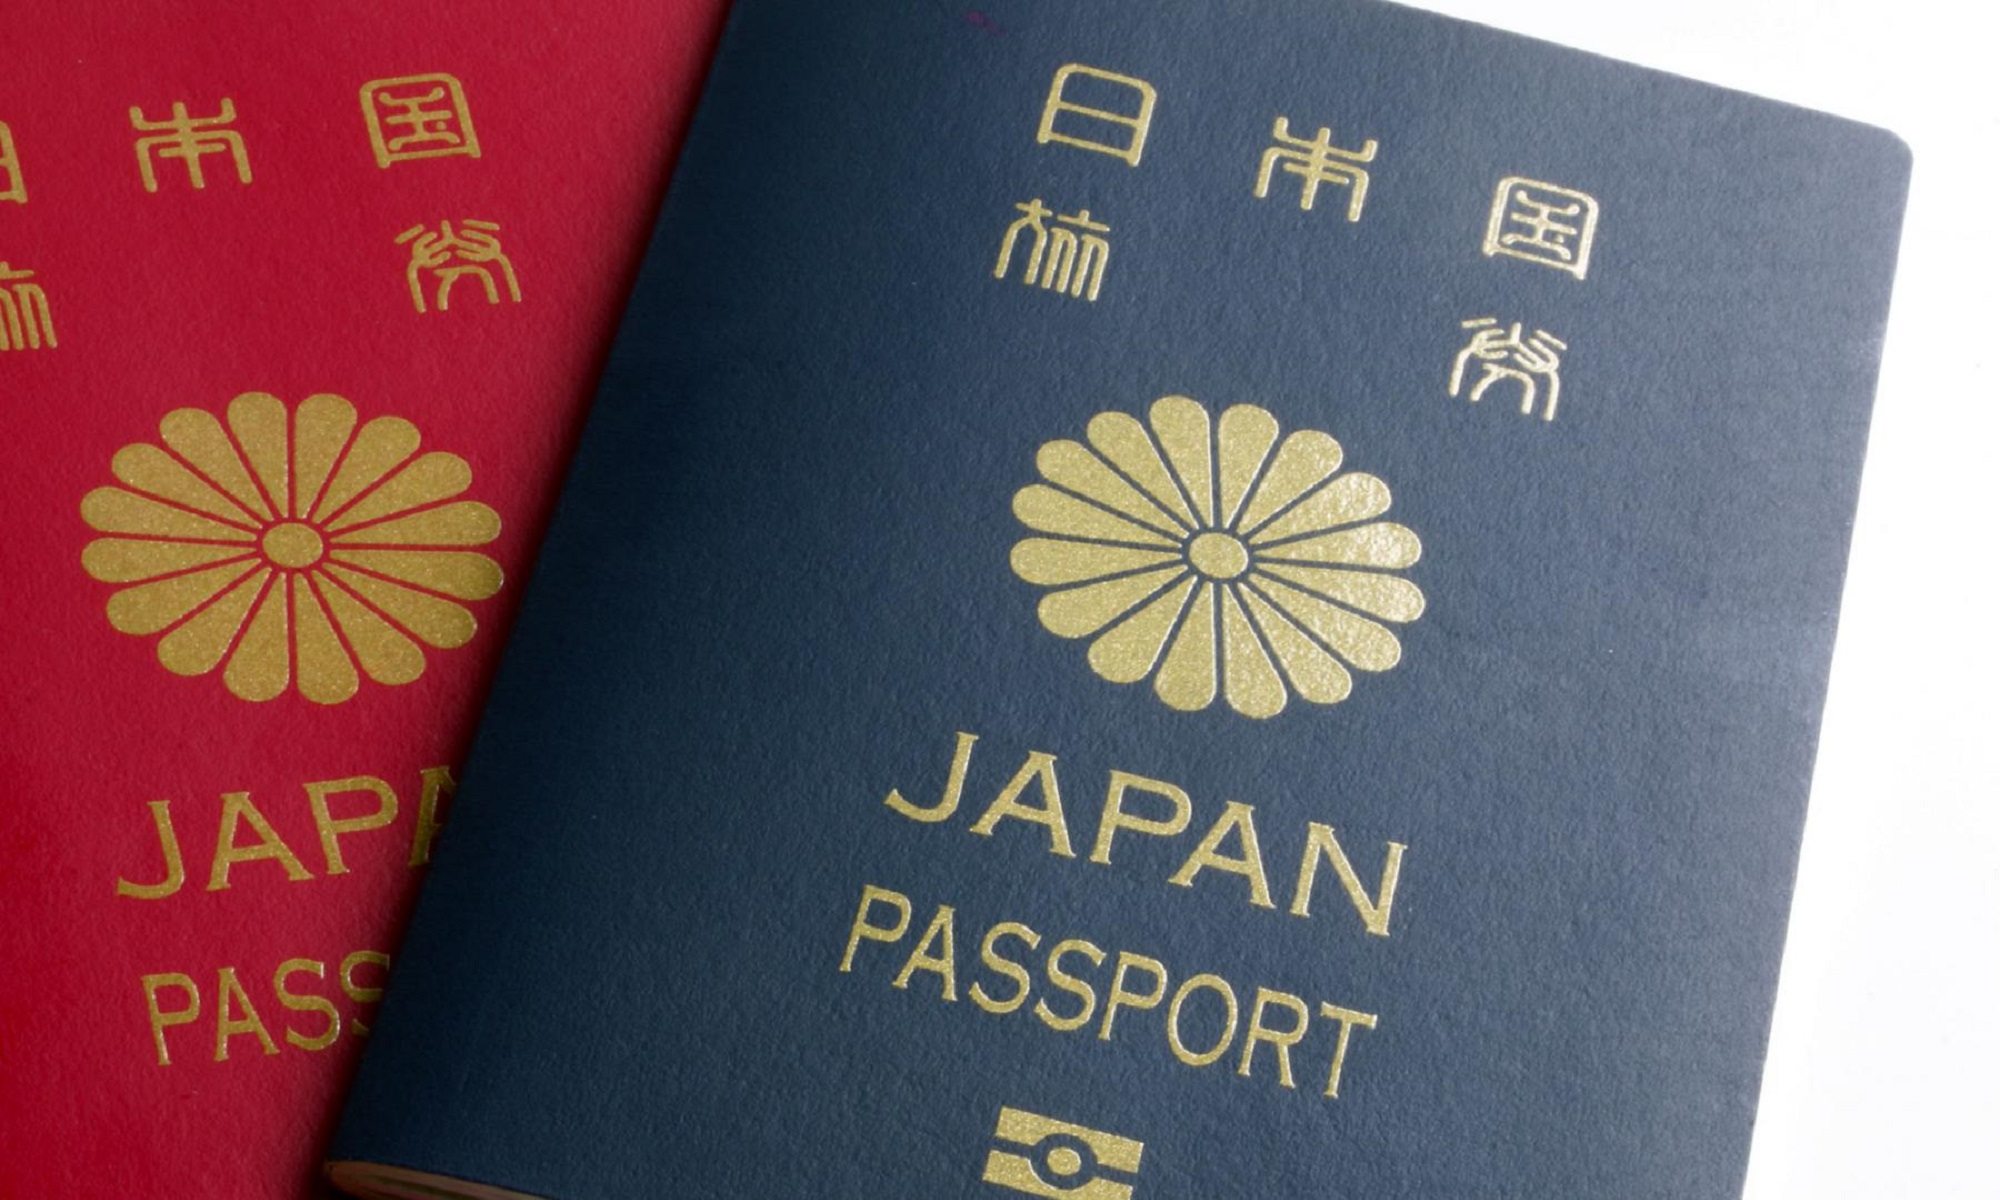 Immigration to Japan: Work, Education and Cost of Living